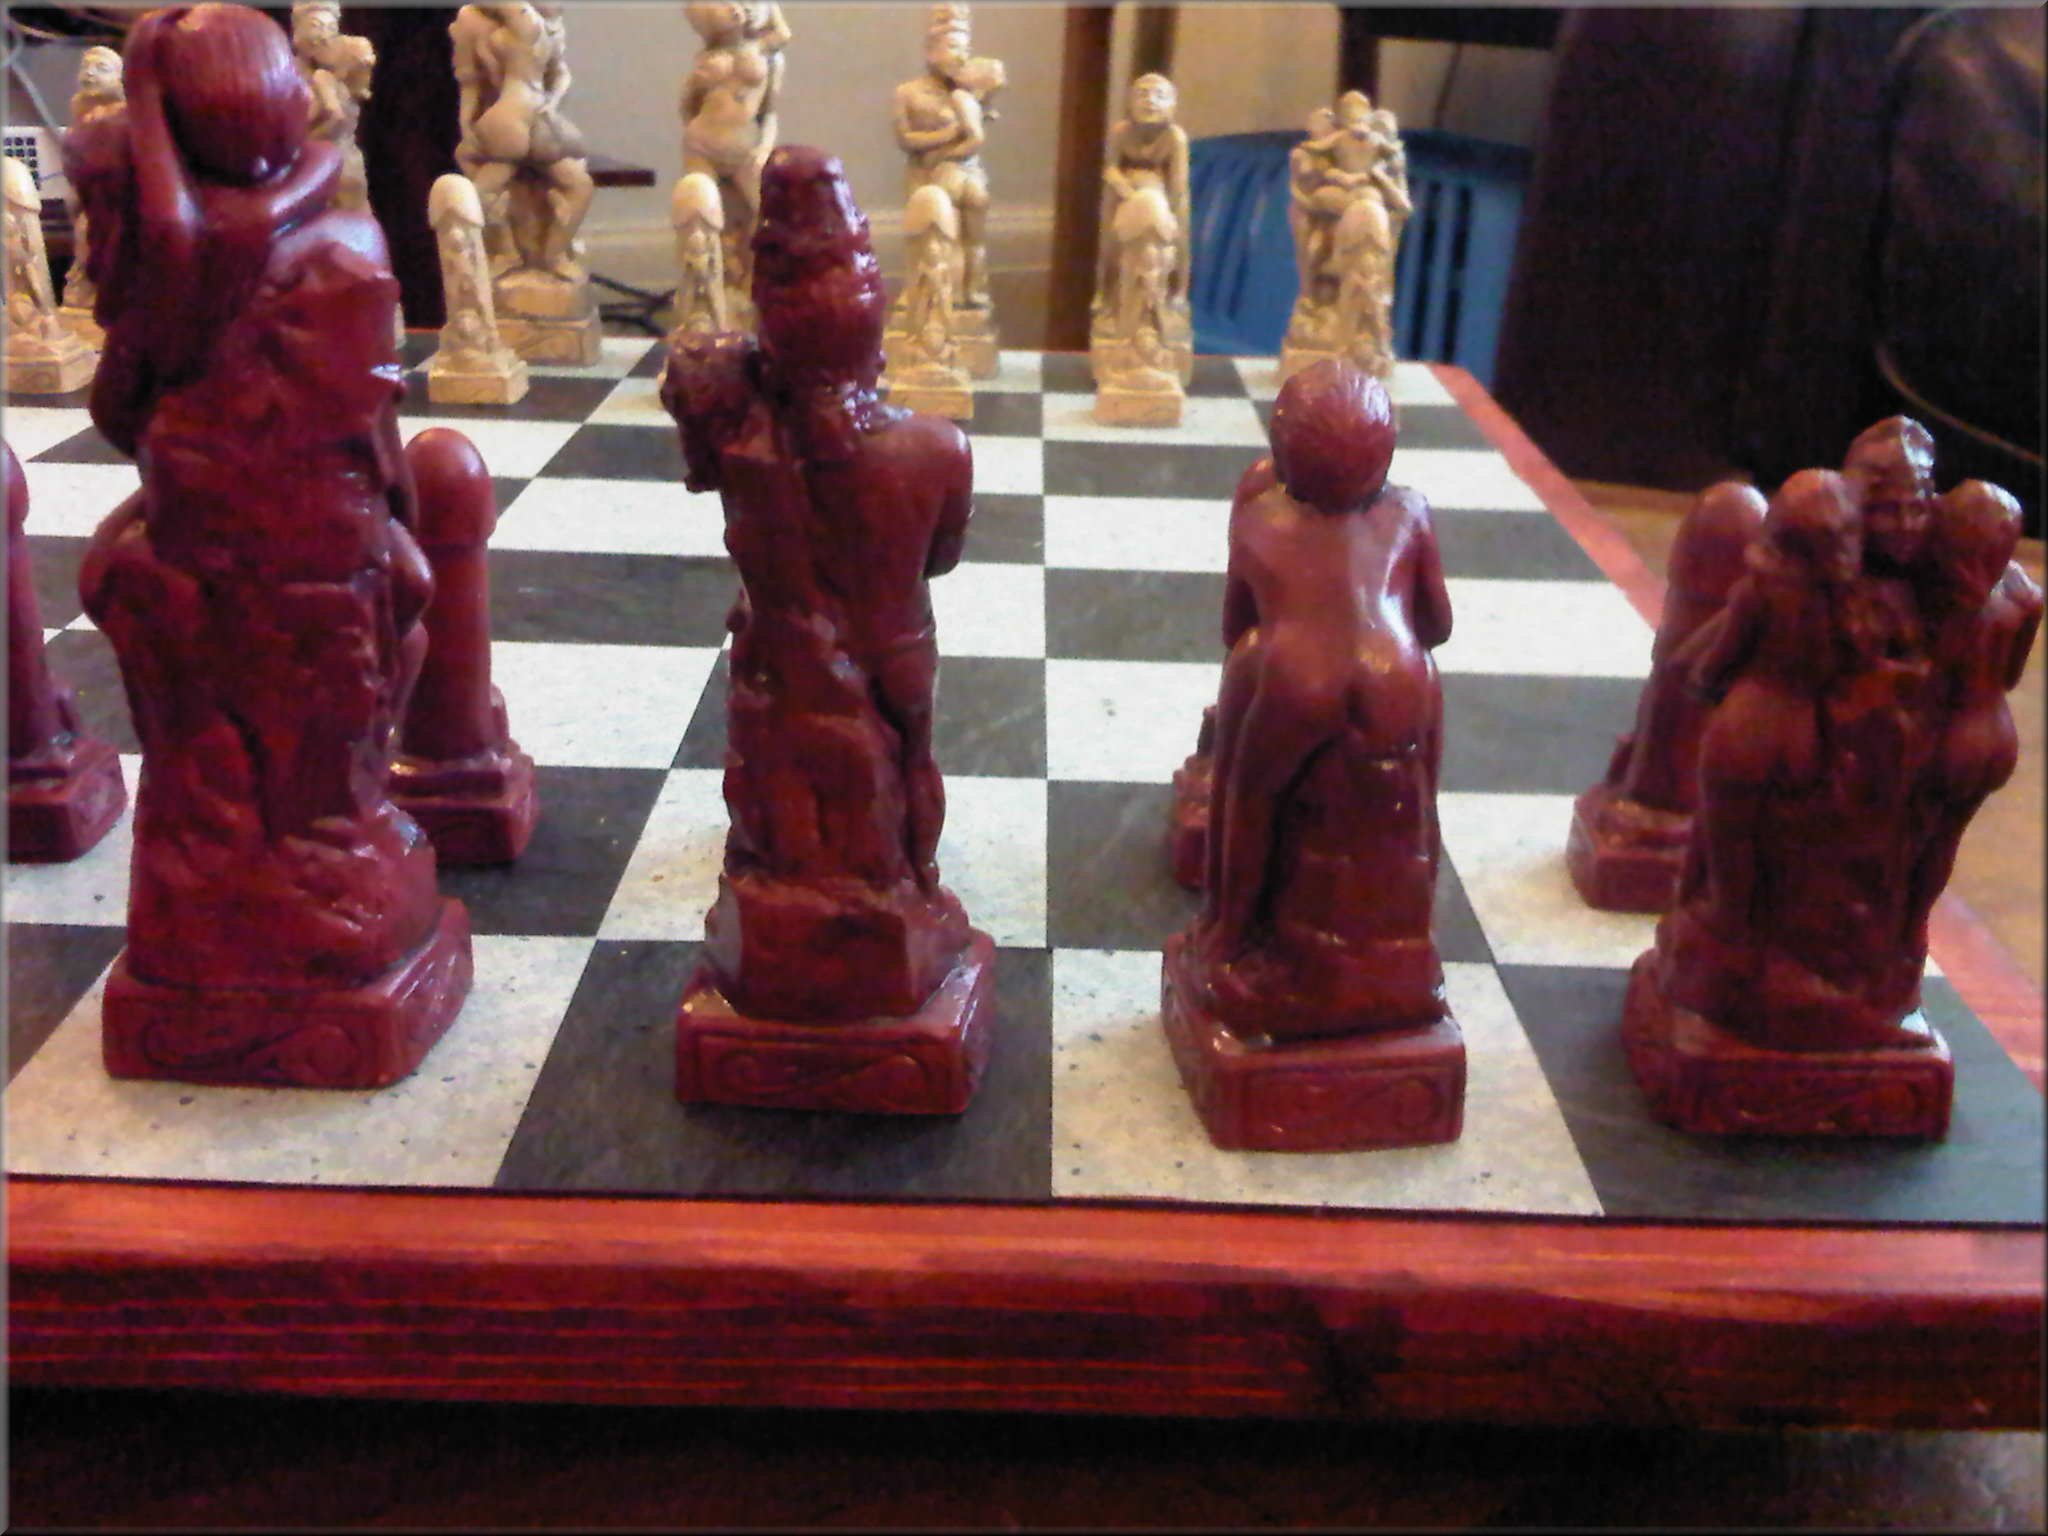 Adult Erotic Sex Themed Kama Sutra Chess Set With 2 Extra Queens And 3148